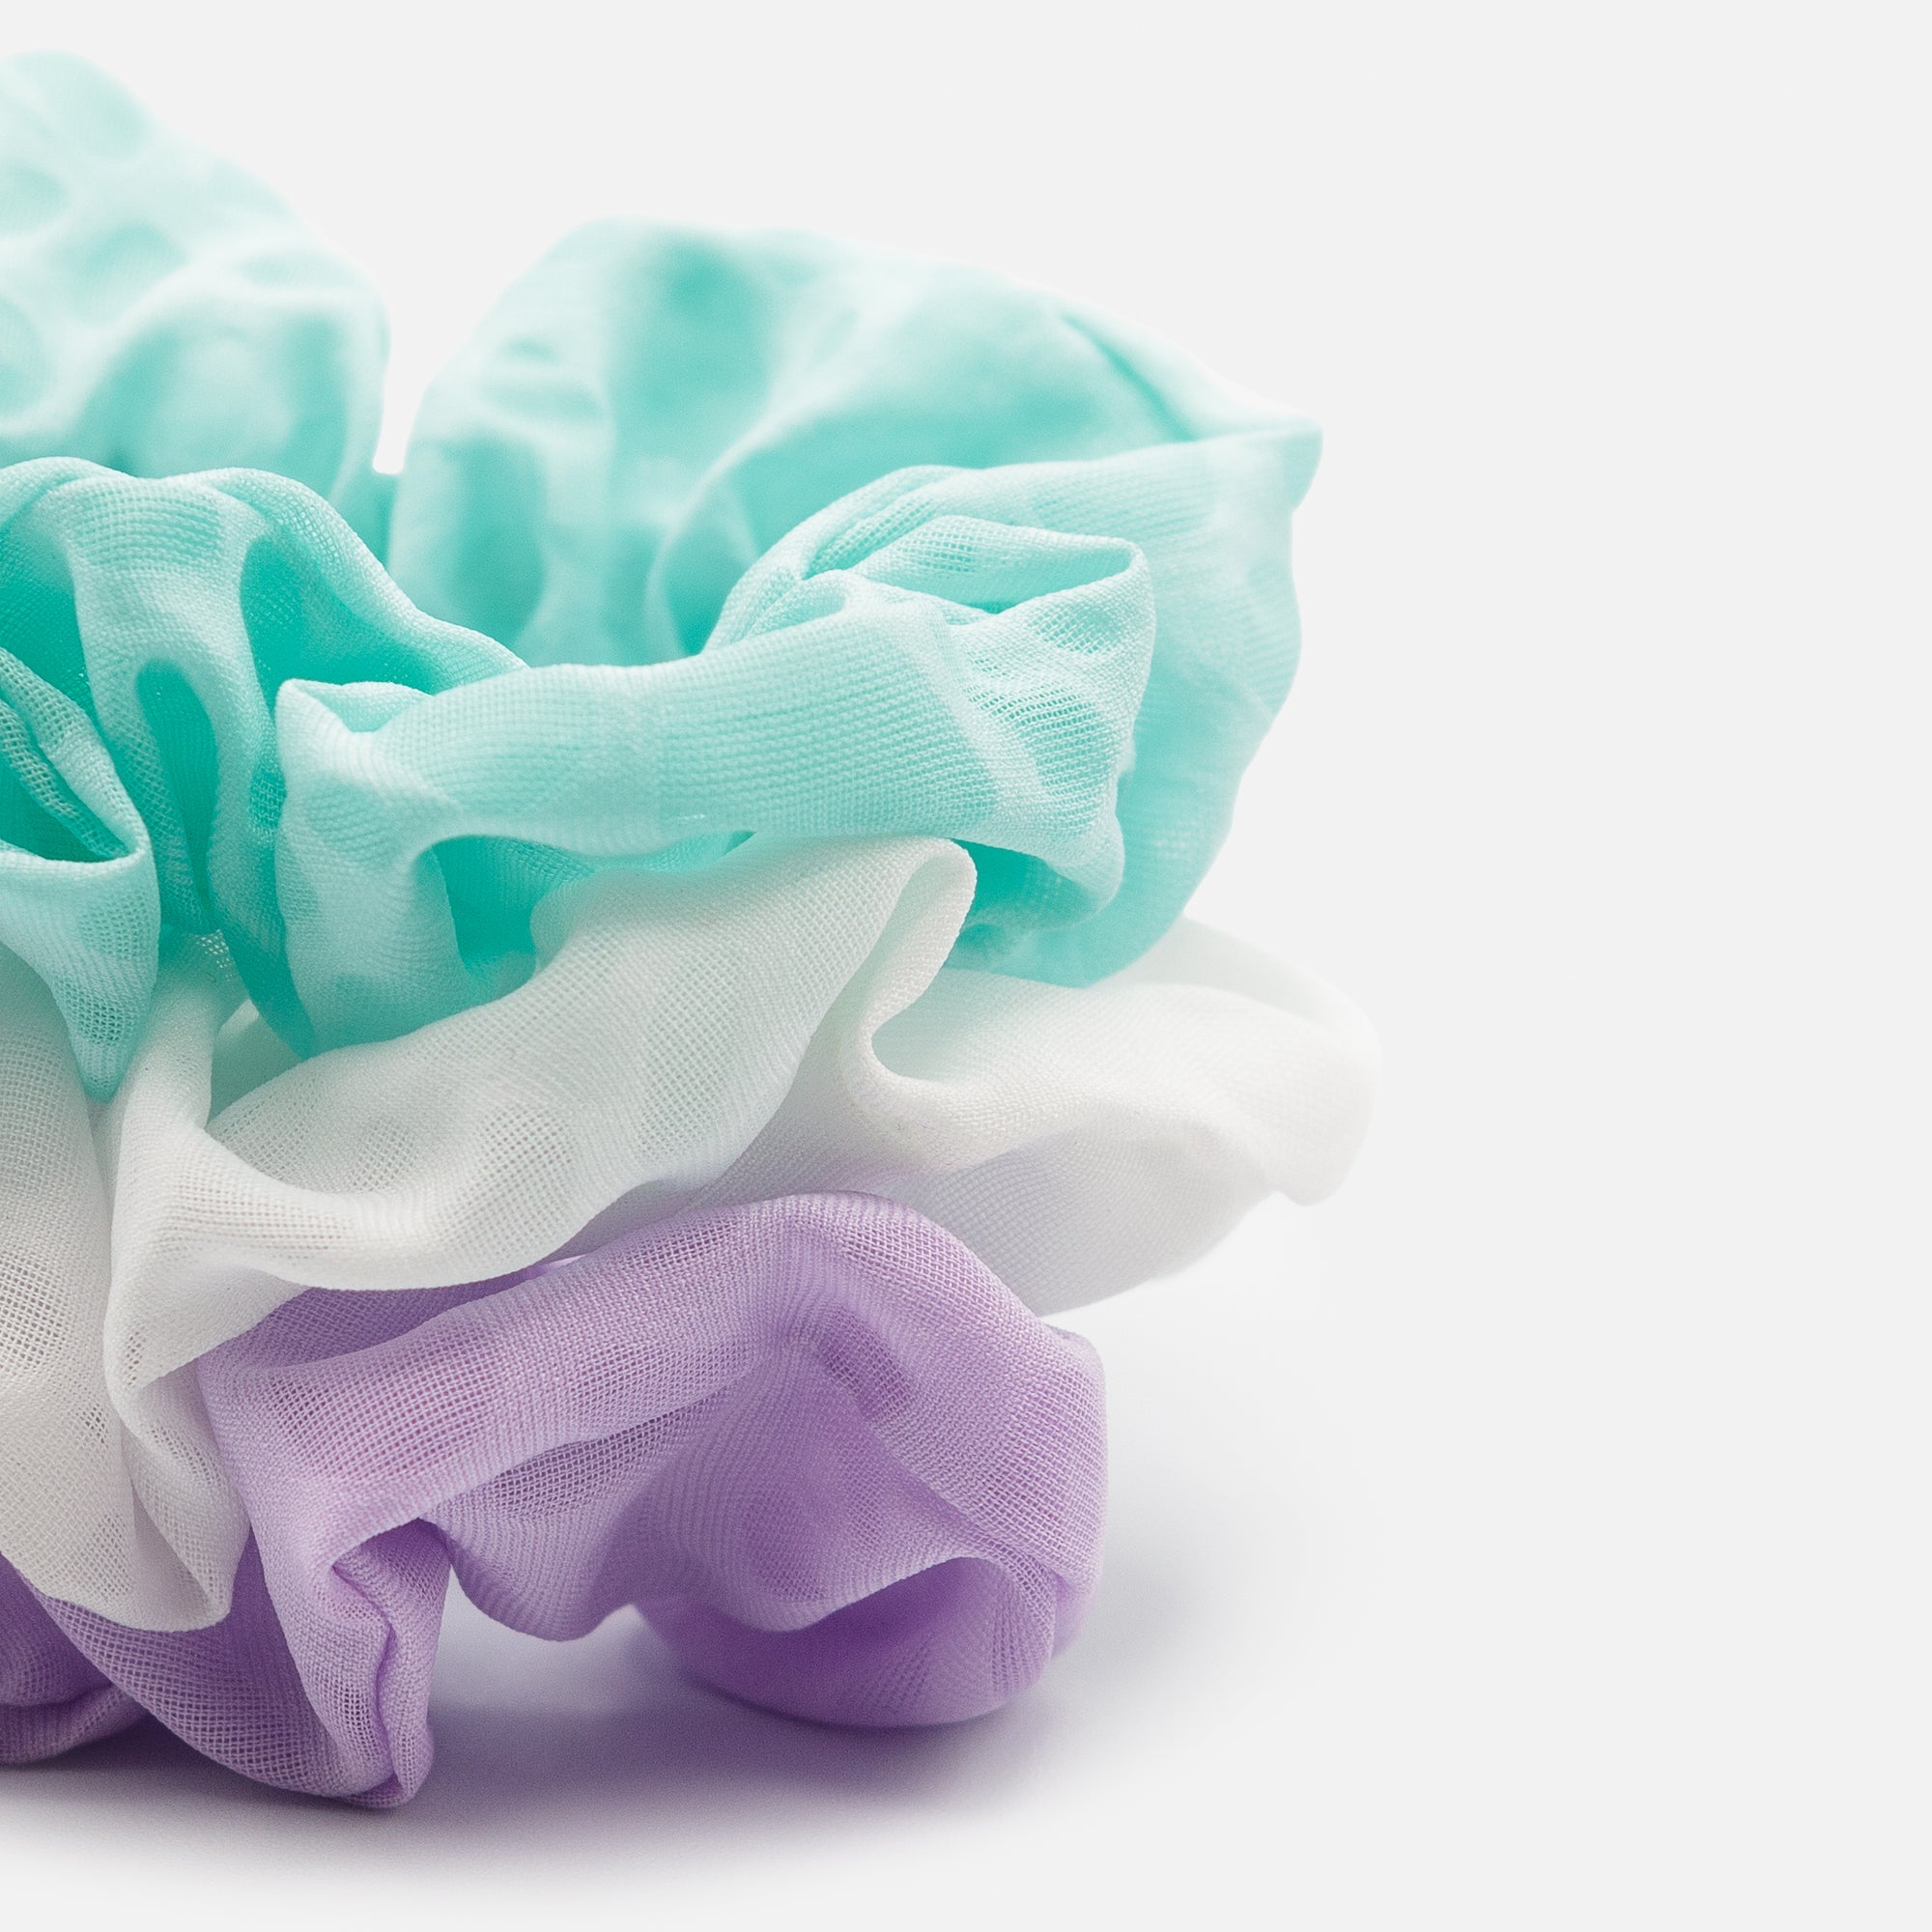 Trio of turquoise, white and mauve scrunchies